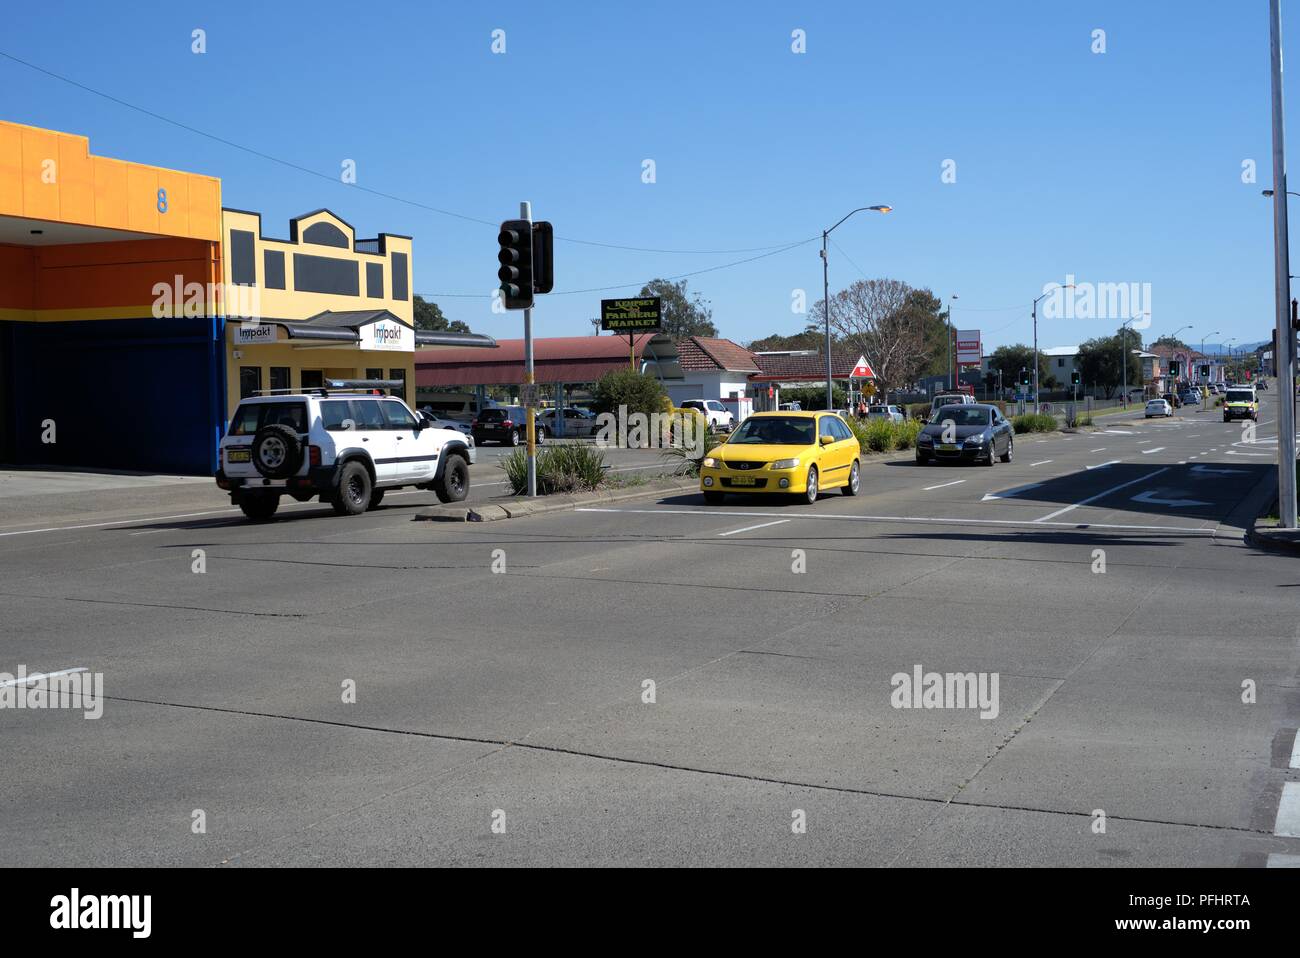 Moving vehicles at traffic intersection in Australian town of Kempsey in New South Wales on 13 August 2018. Stock Photo